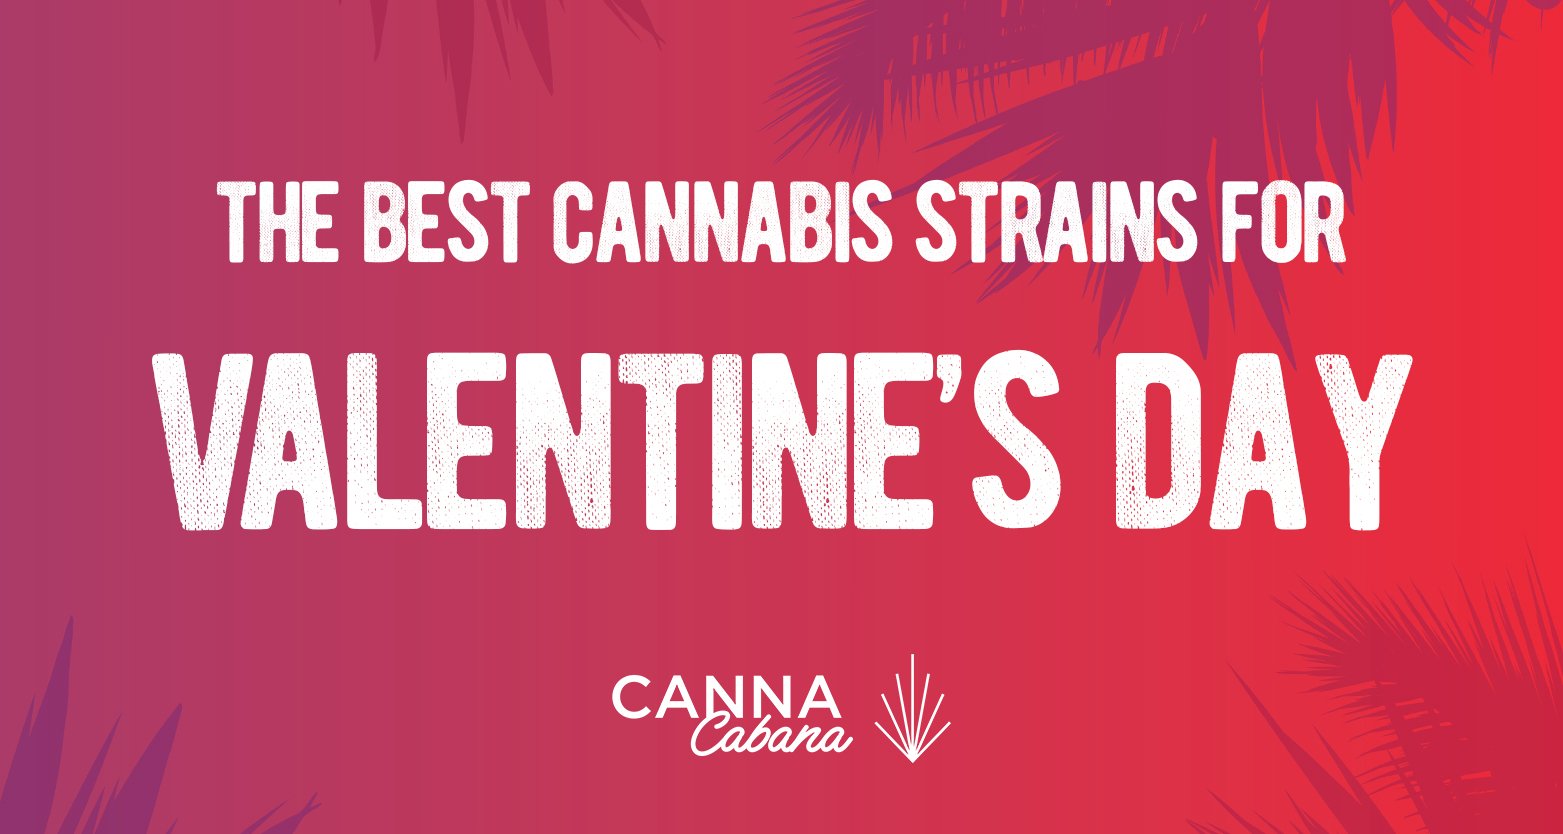 The Best Cannabis Strains for Valentine's Day 2021